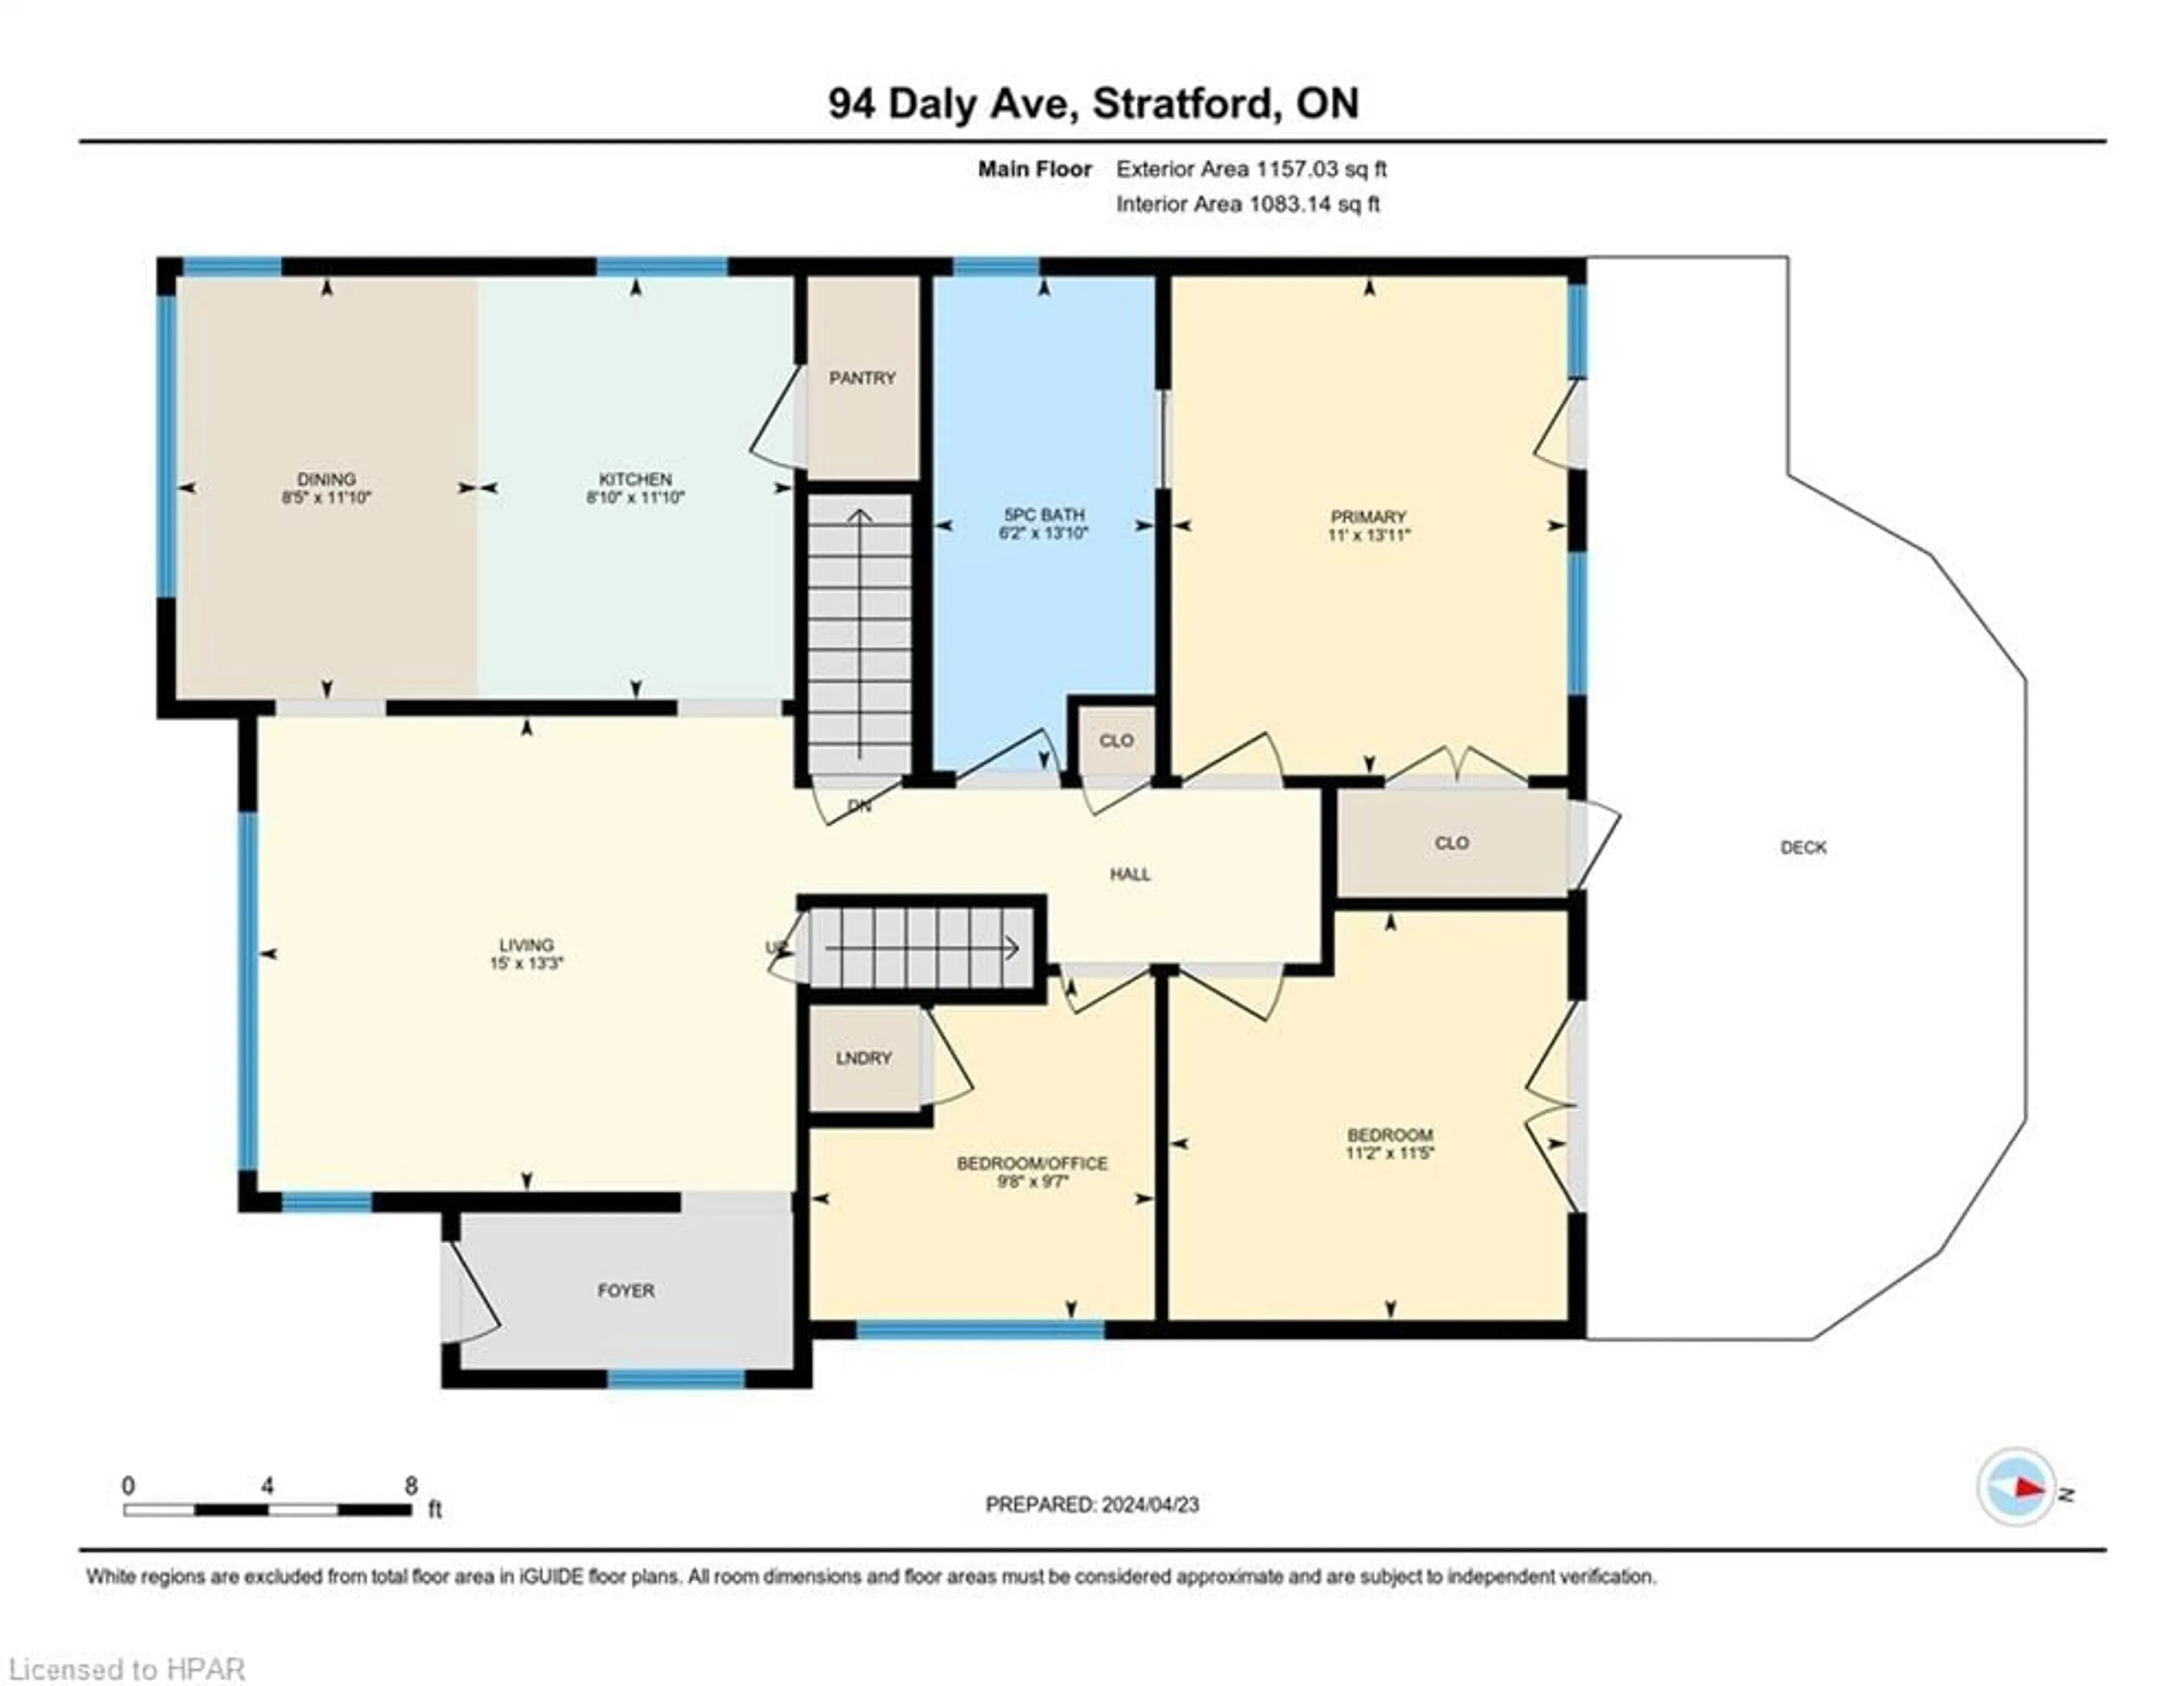 Floor plan for 94 Daly Ave, Stratford Ontario N5A 1B8